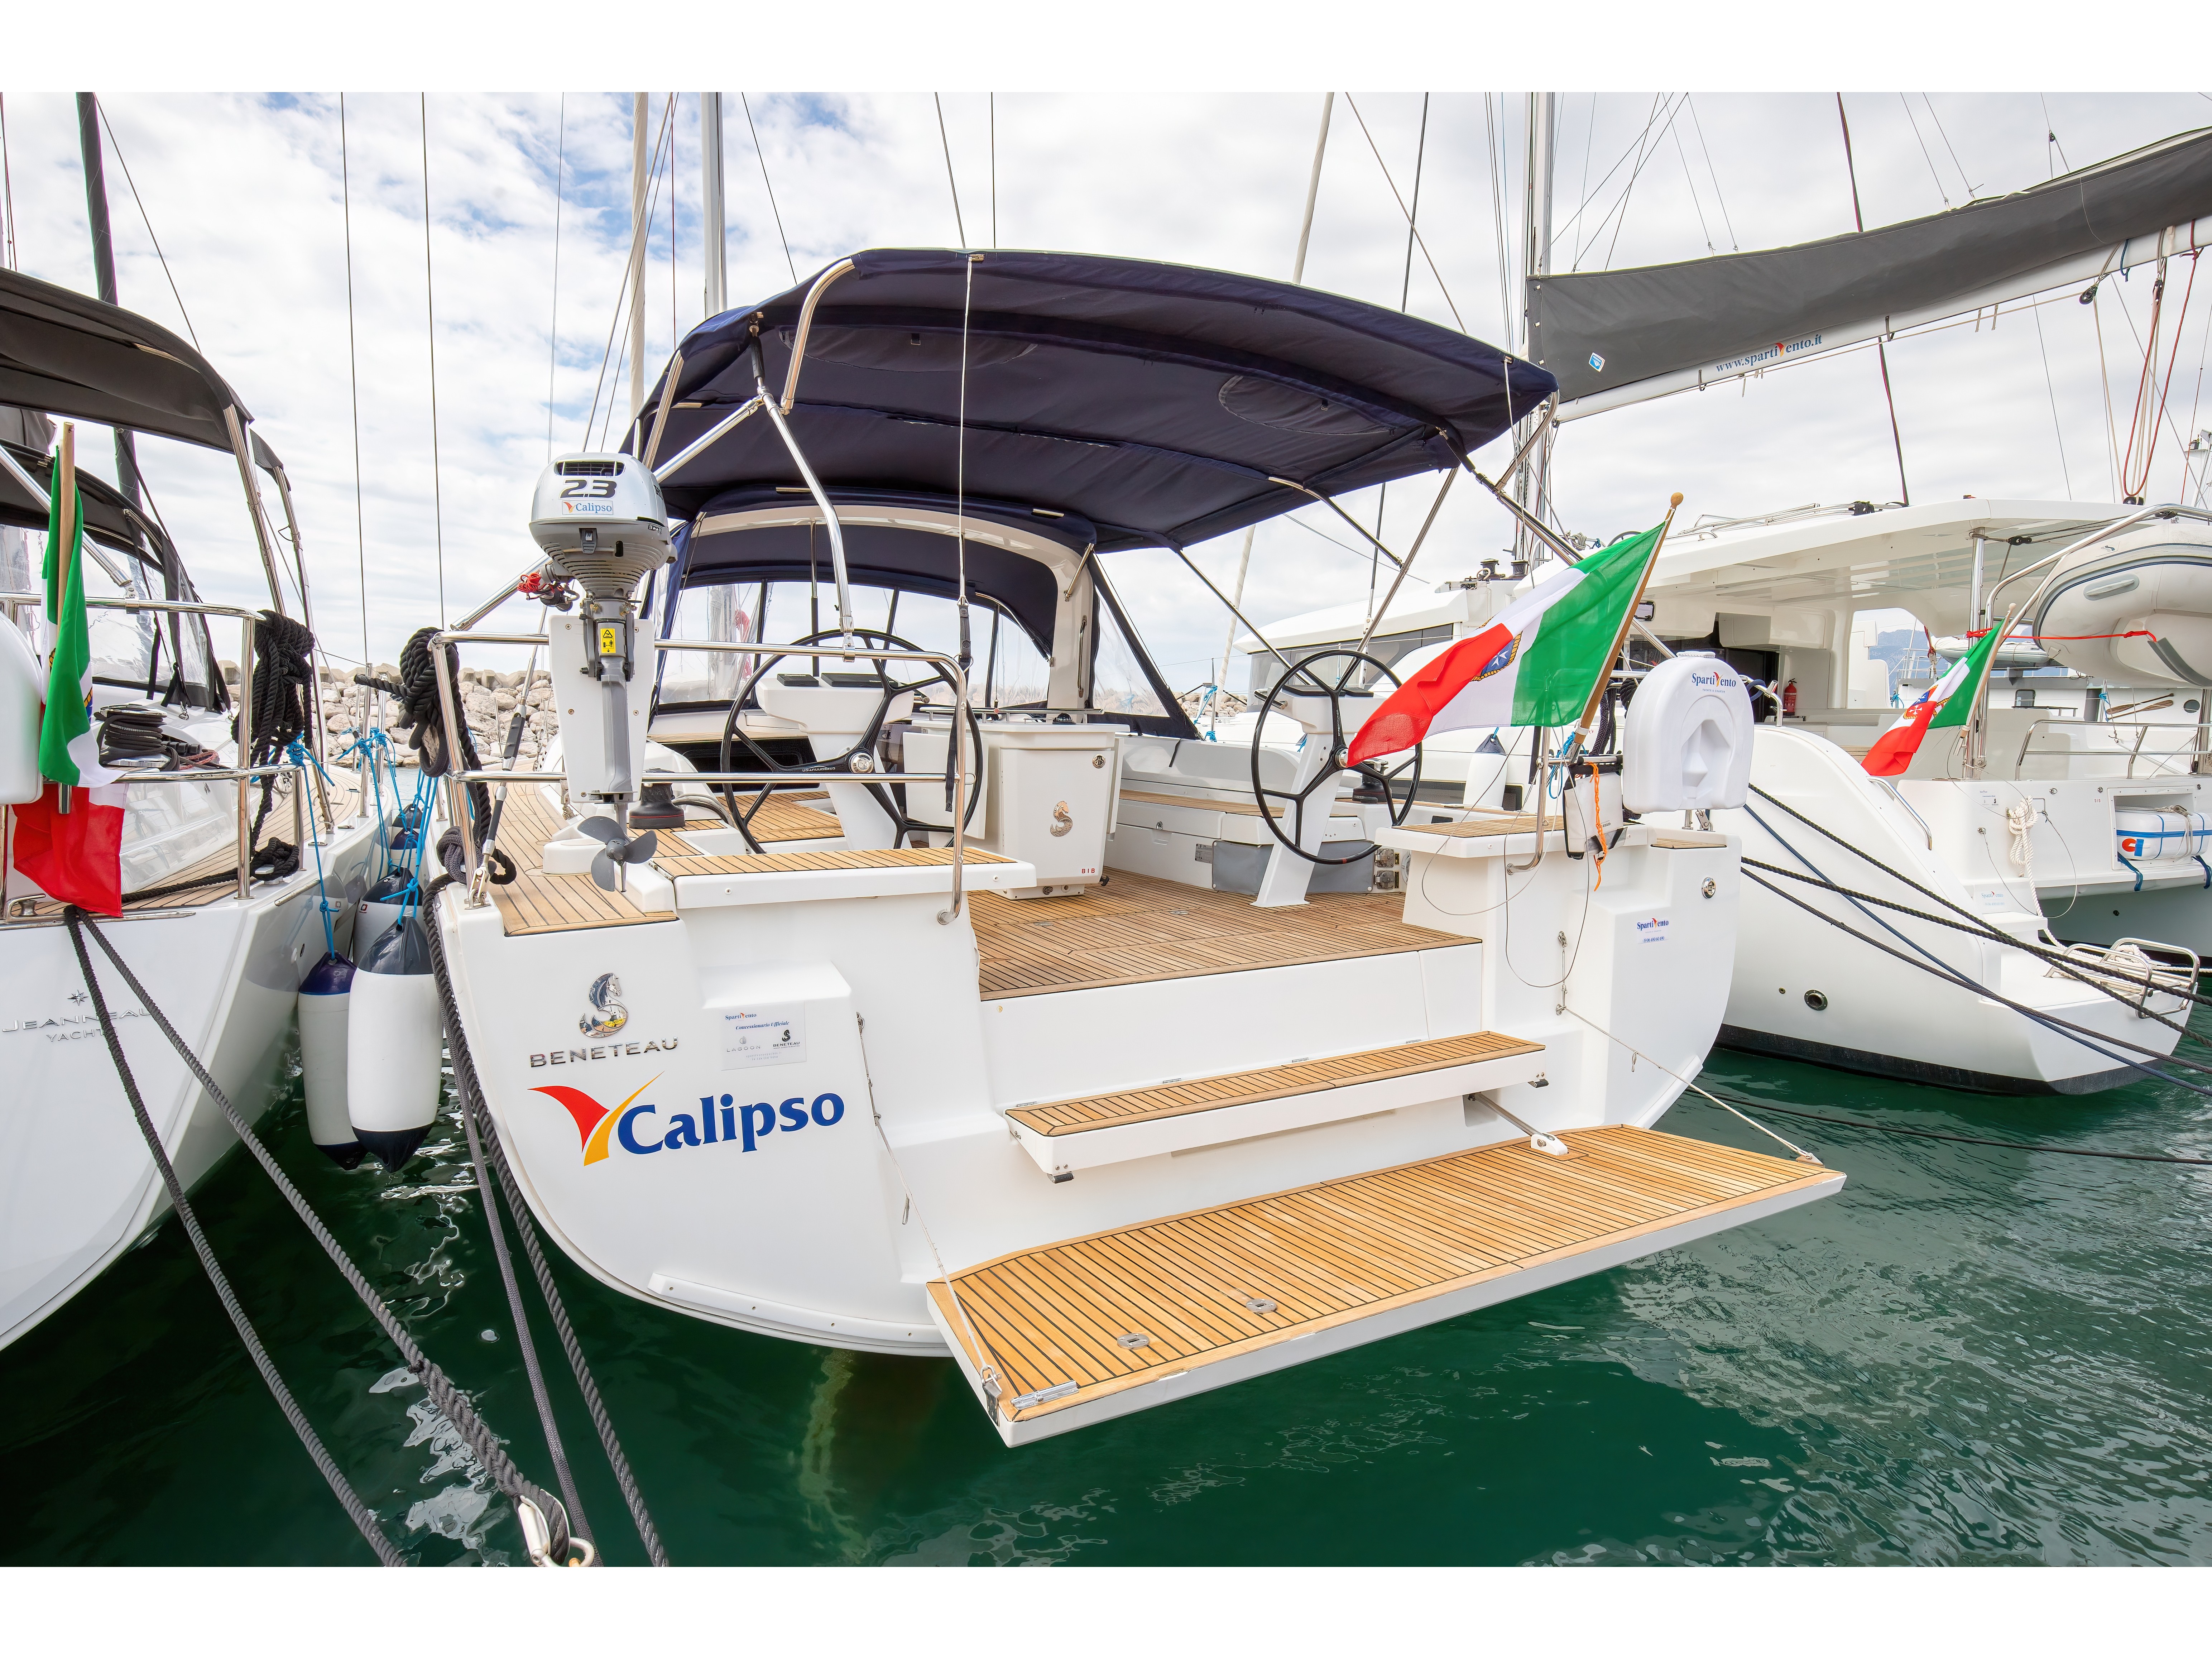 Oceanis 51.1 - Yacht Charter Salerno & Boat hire in Italy Campania Salerno Province Salerno Marina d'Arechi 2